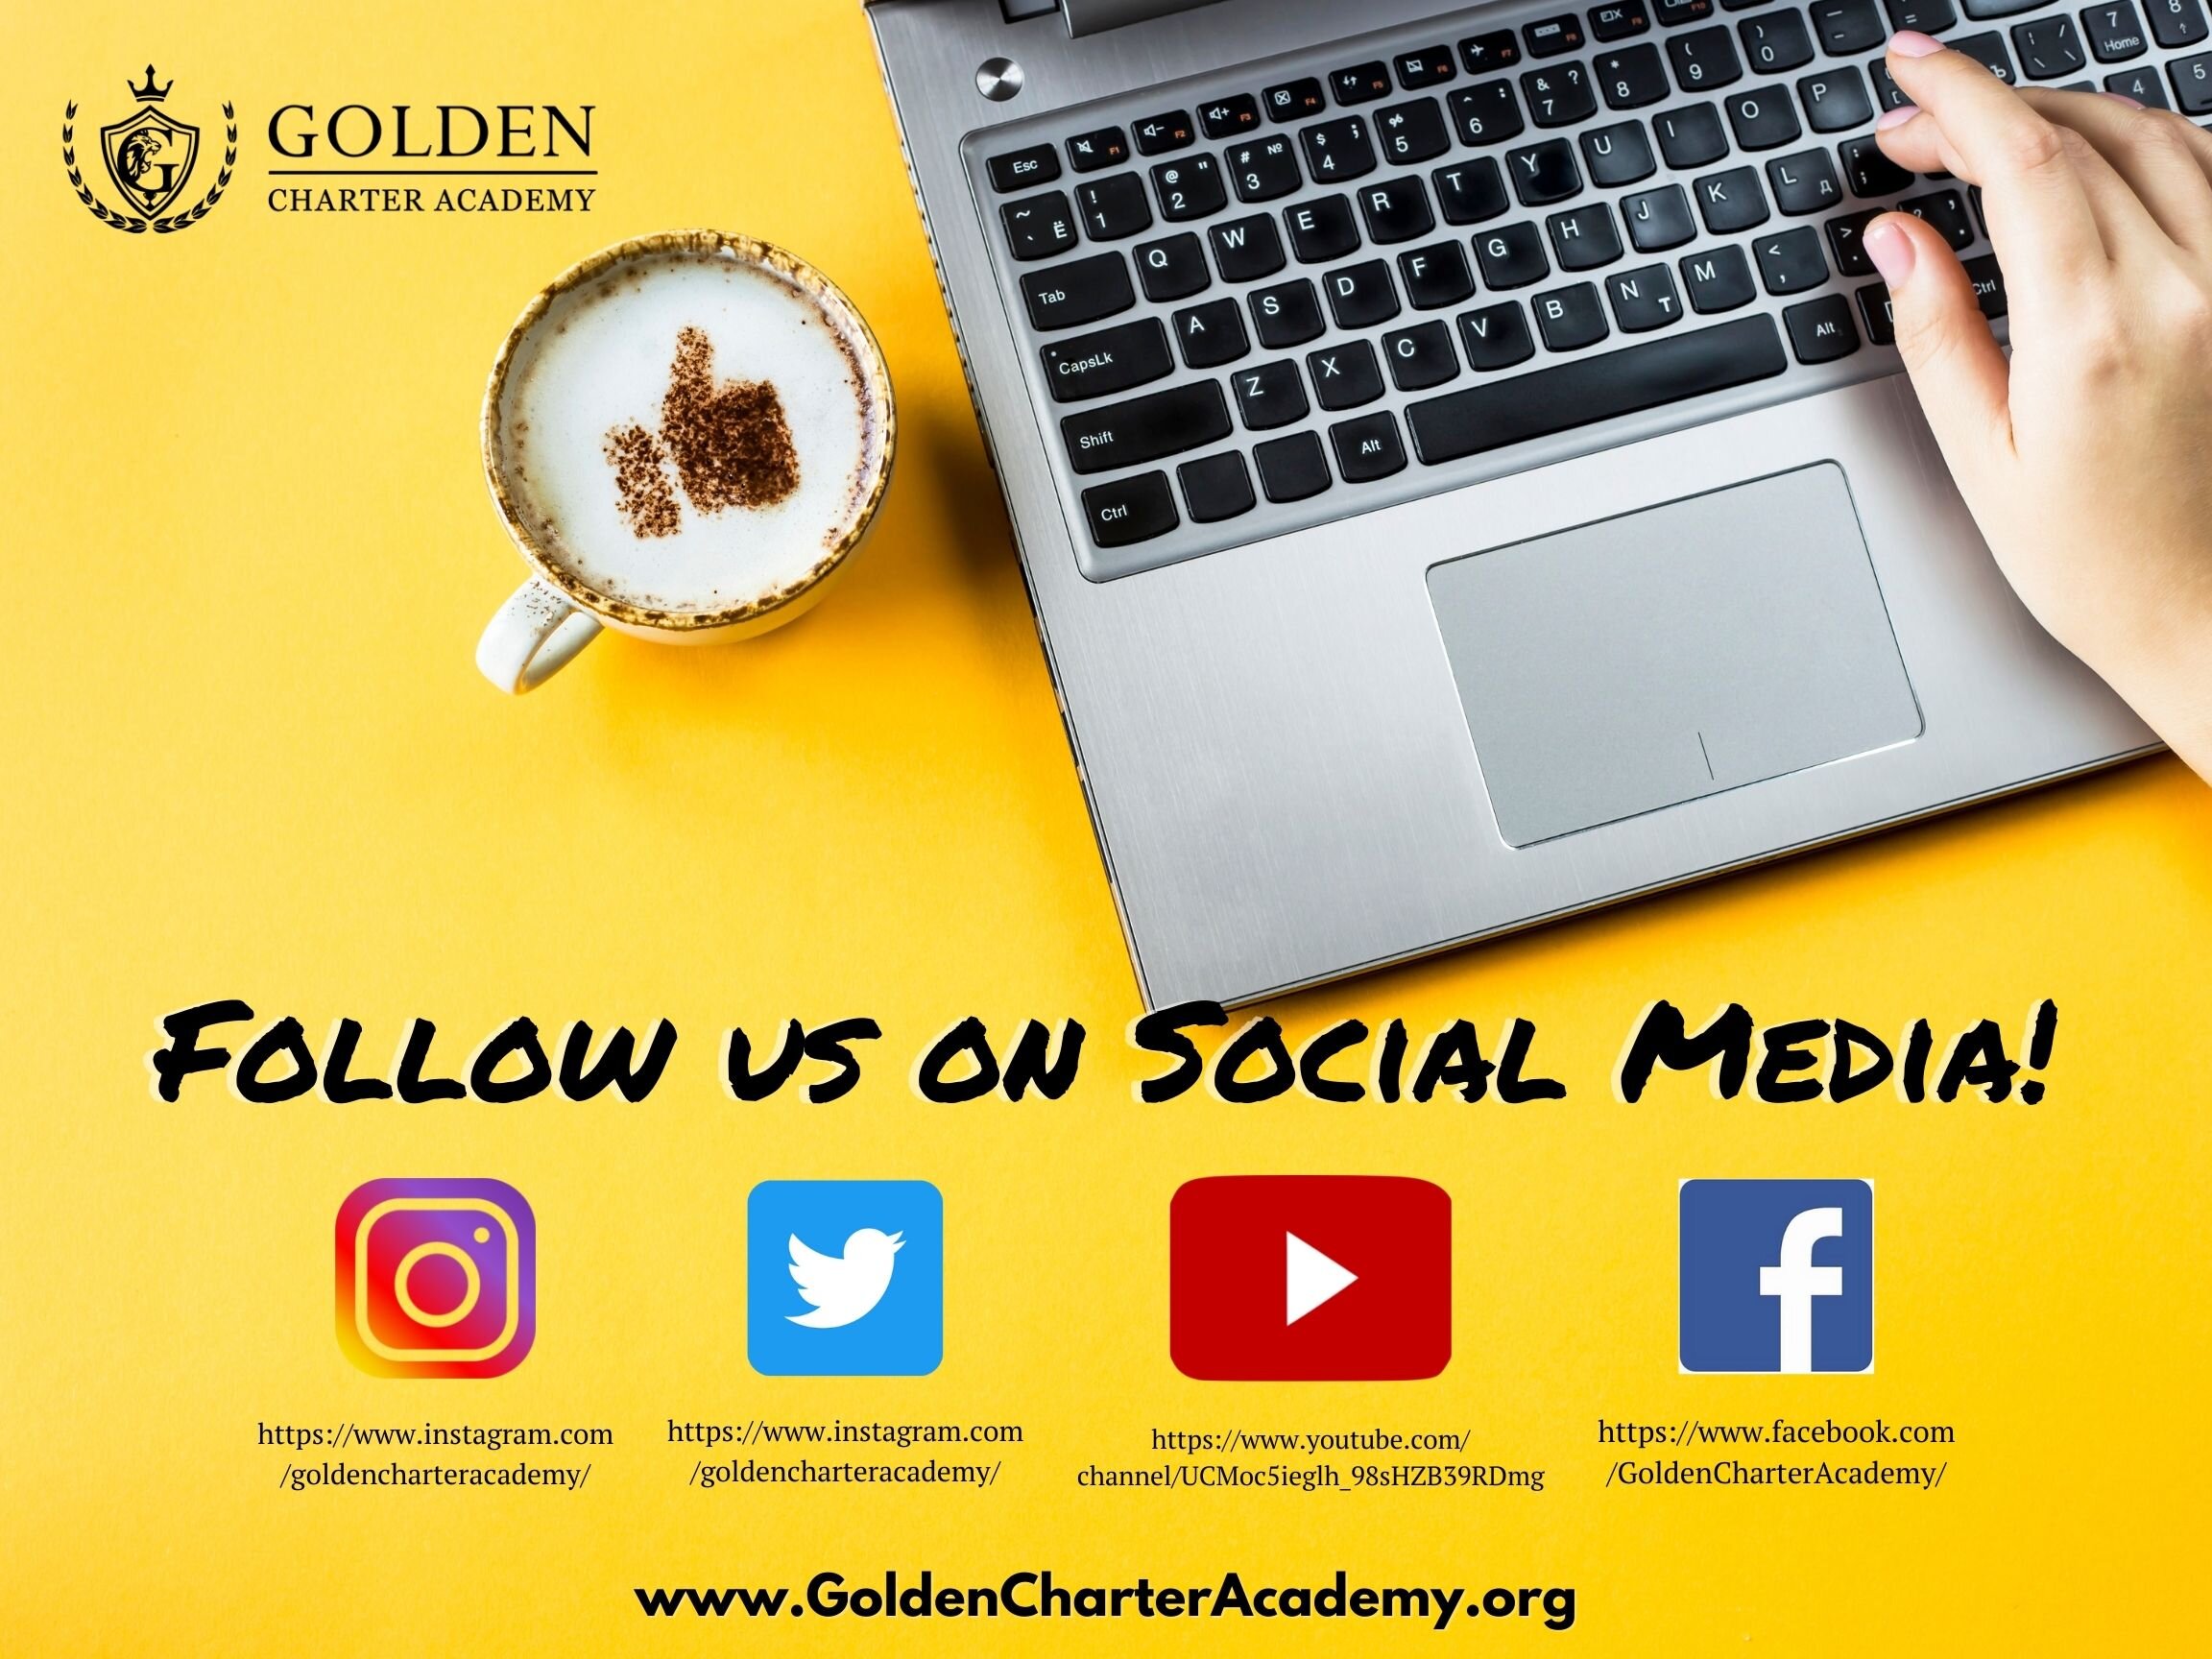 Follow us here on Social Media!Meet our staff and see the latest updates!